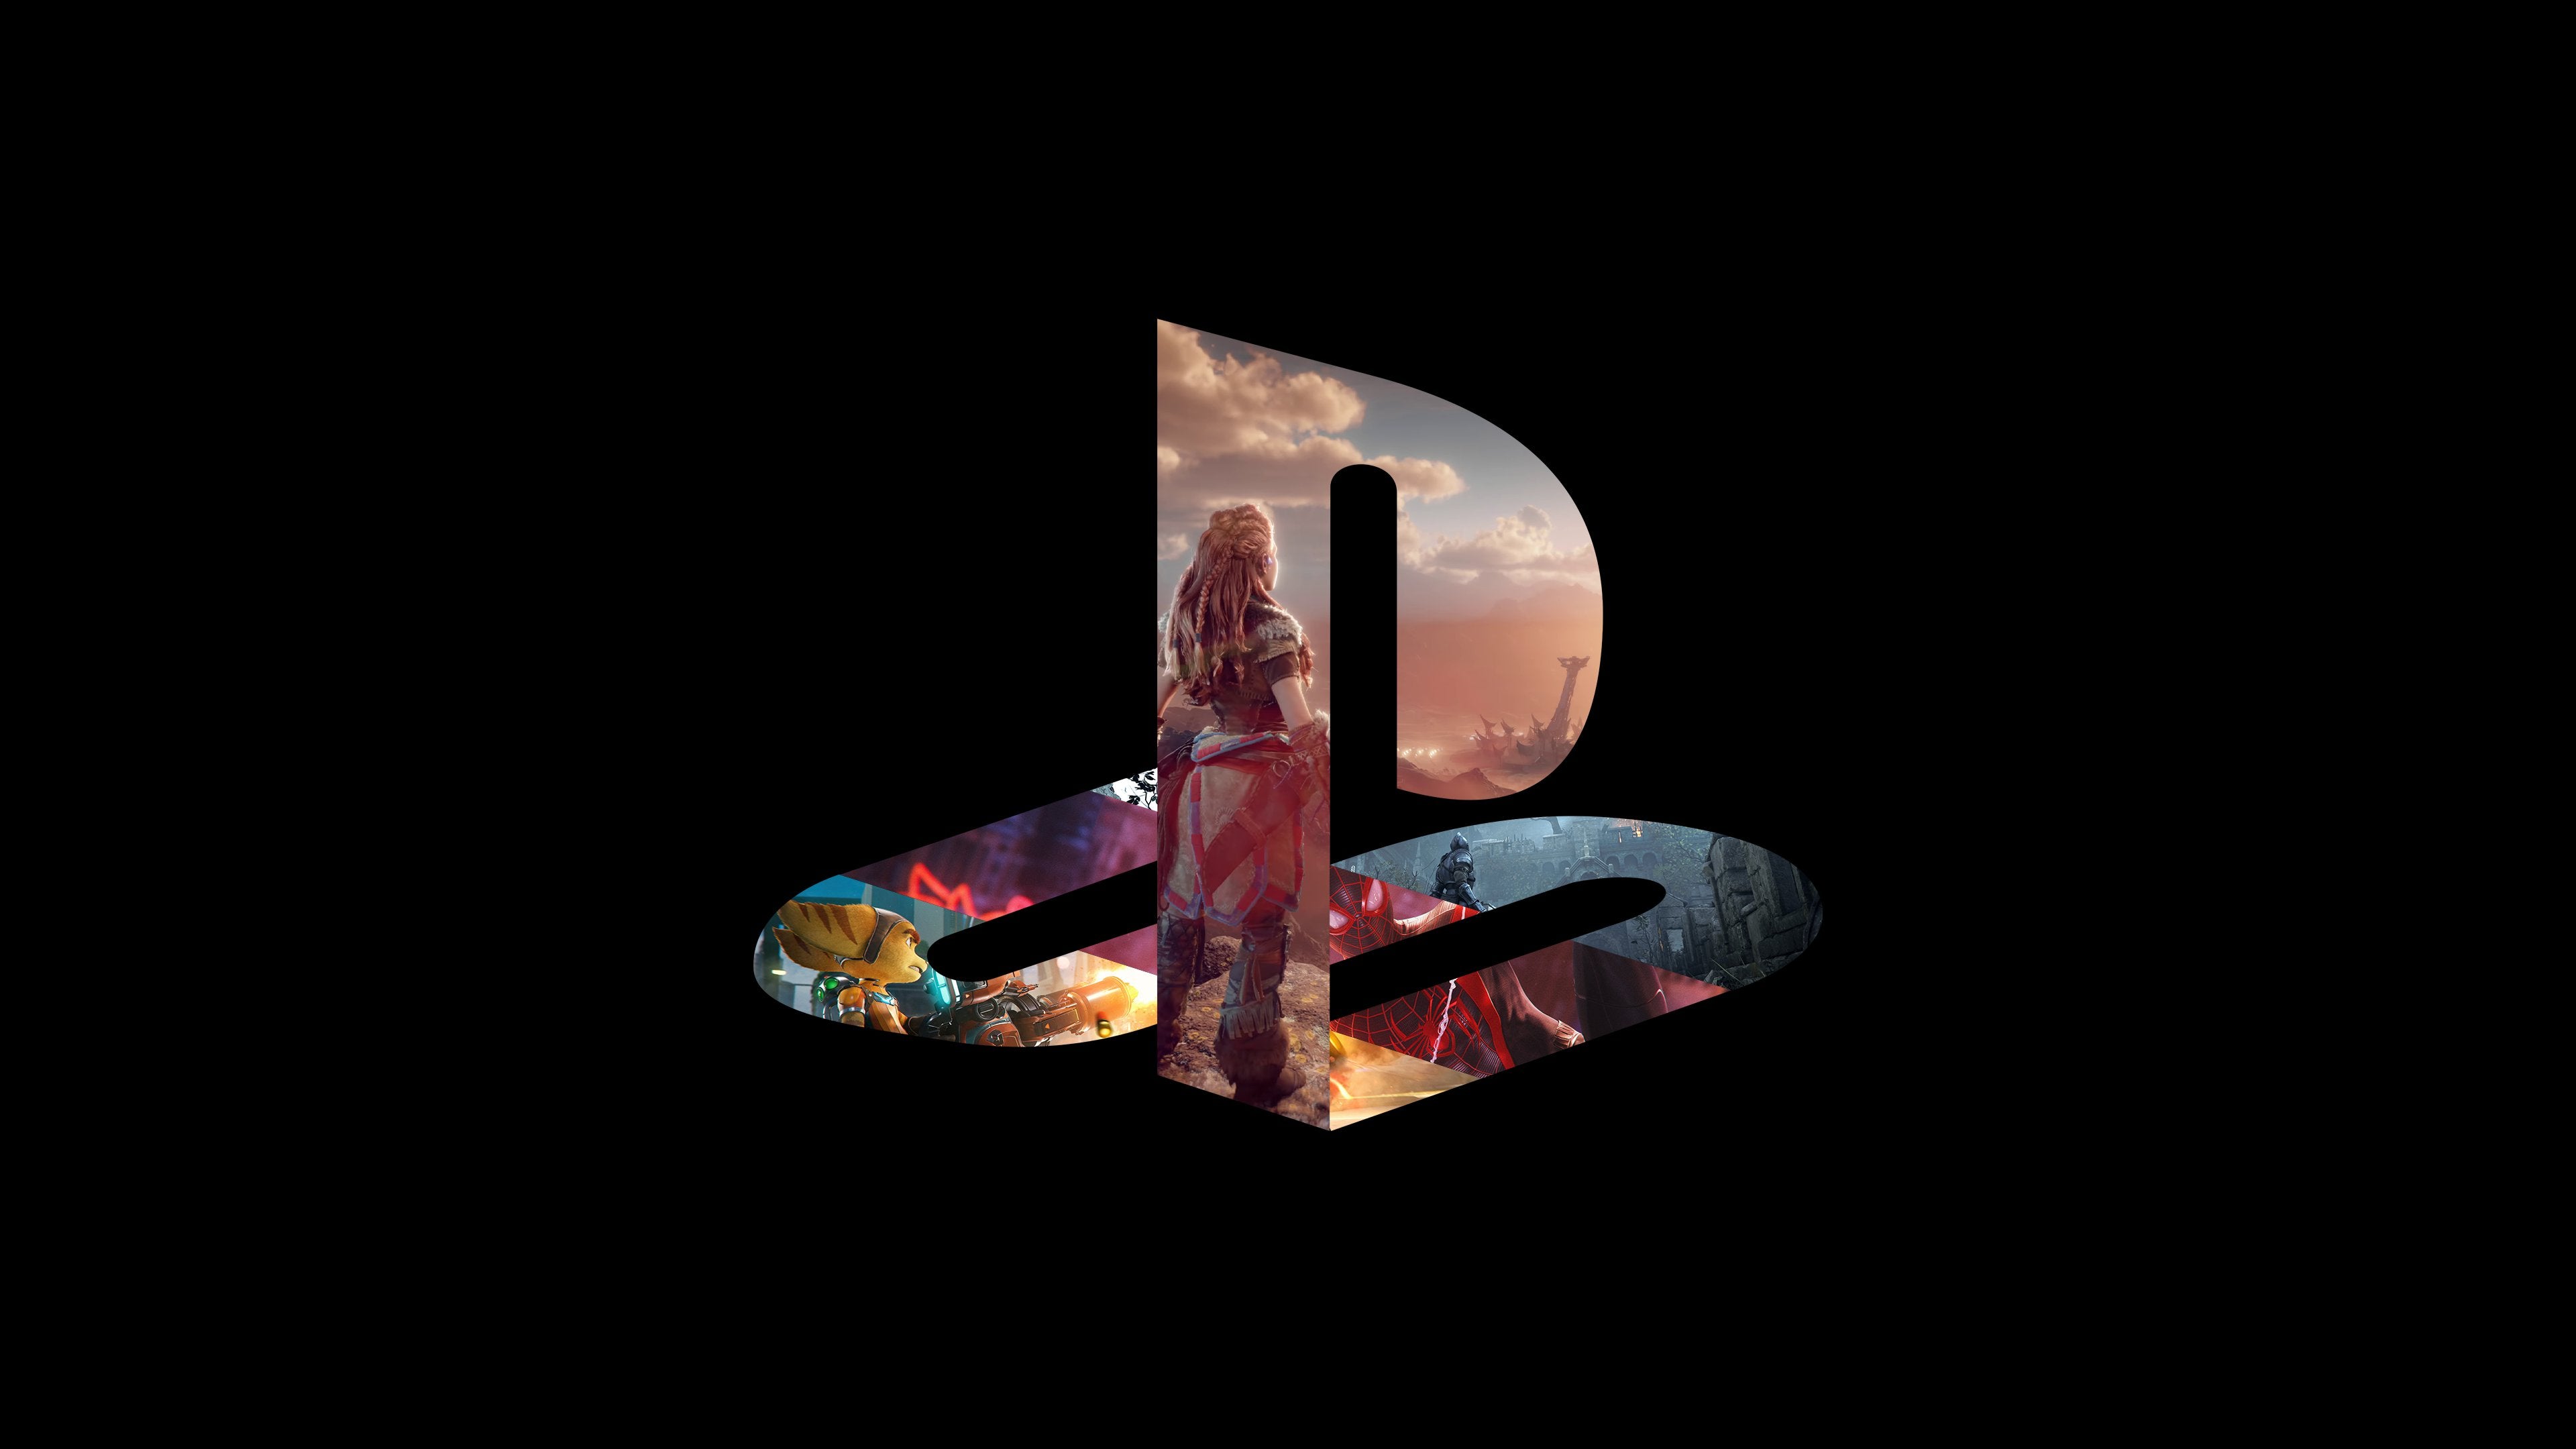 New wallpaper, this time using the PlayStation logo